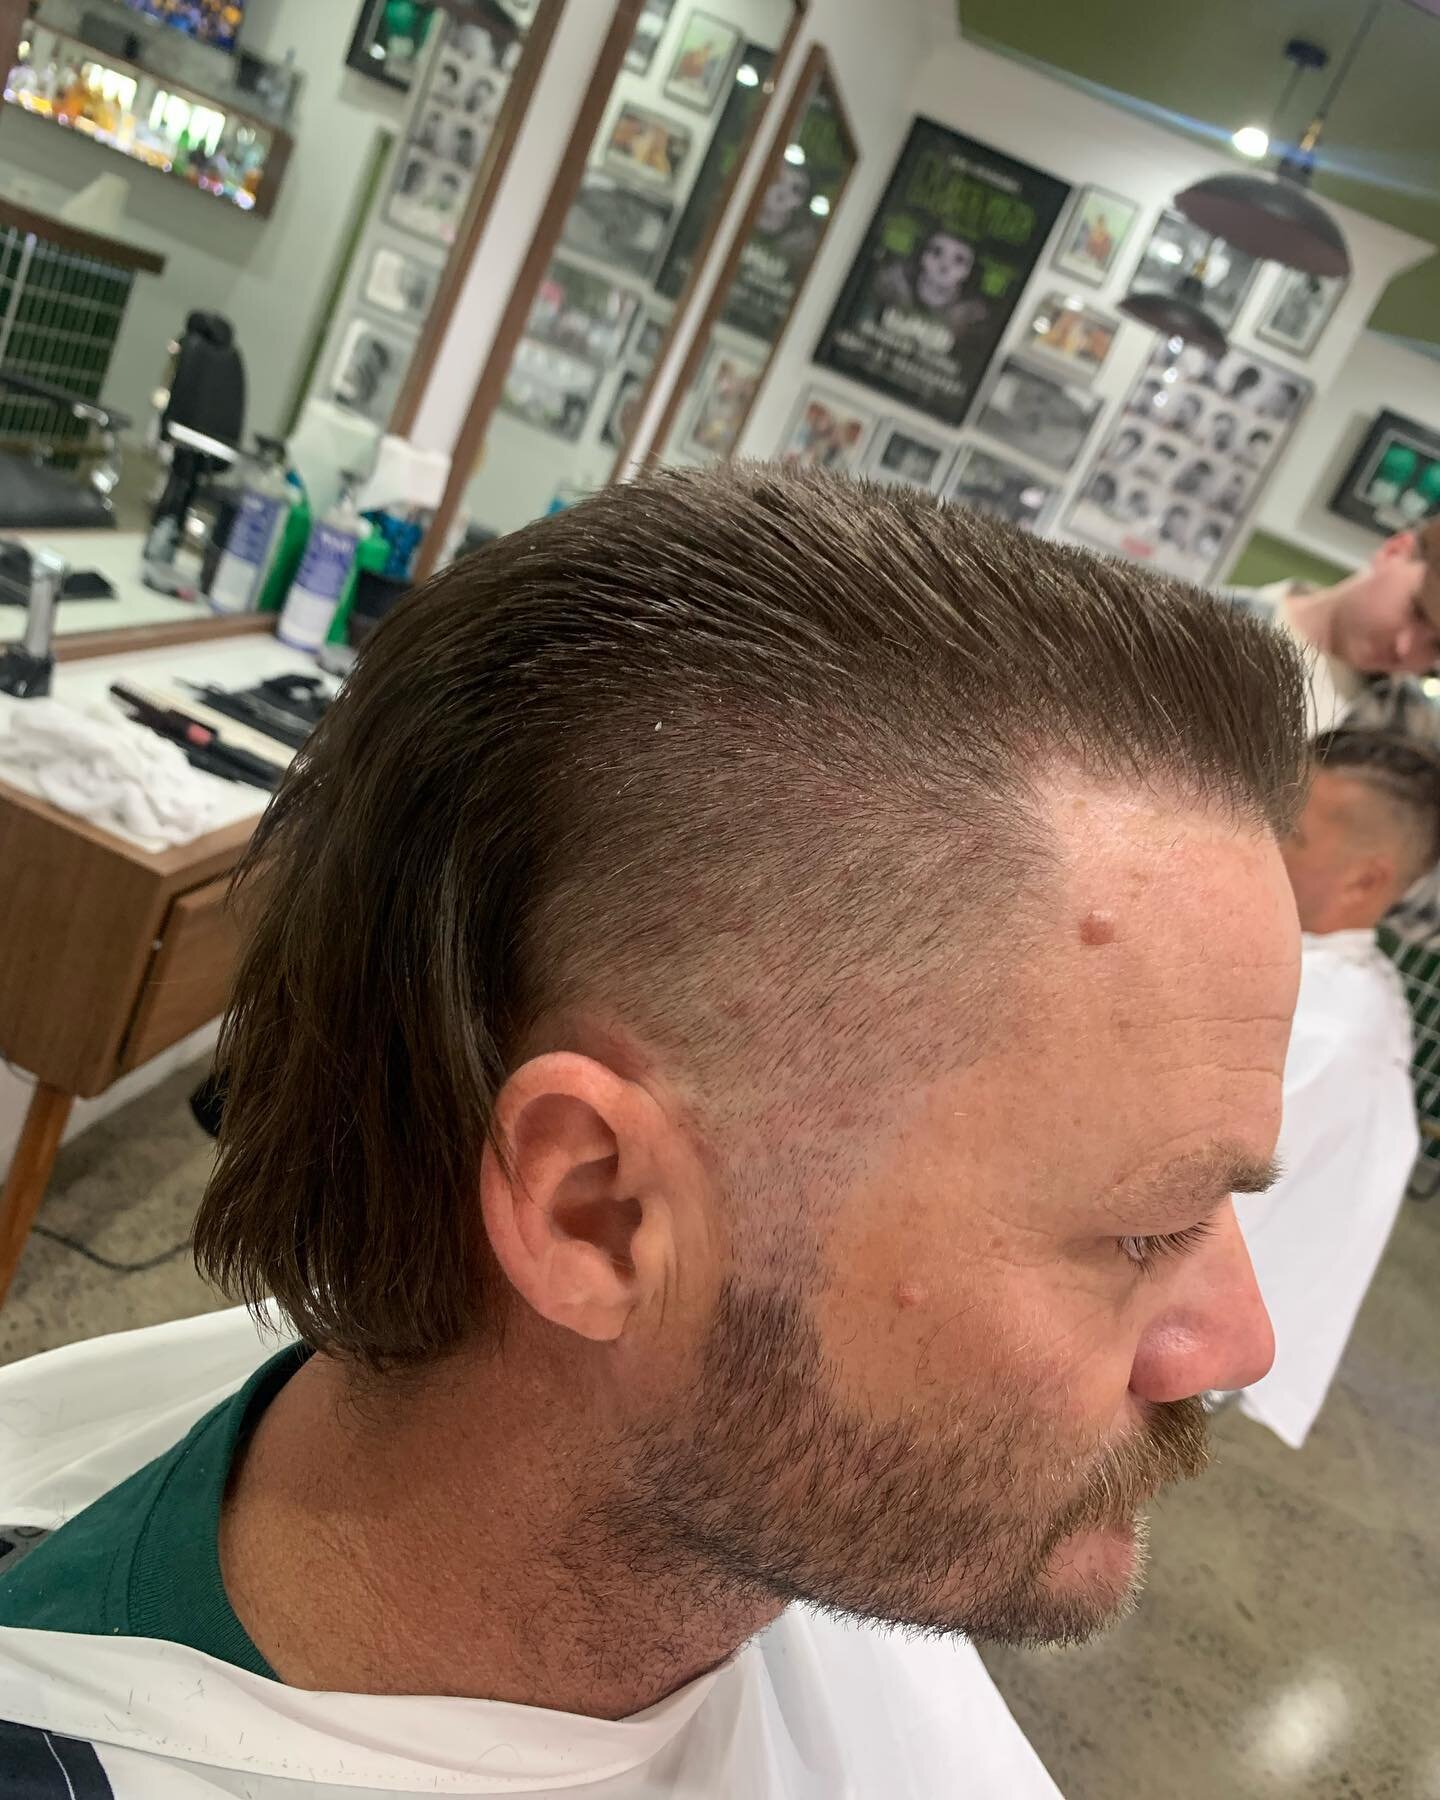 Start of a new week! 💈 

Open 8-6 mon-fri, 8-4 Saturday and 8-1 Sunday. 

📞 55774483 or hit the link in bio to book online

Flat top/mullet combo styled with @uppercutdeluxe 💥💥💥